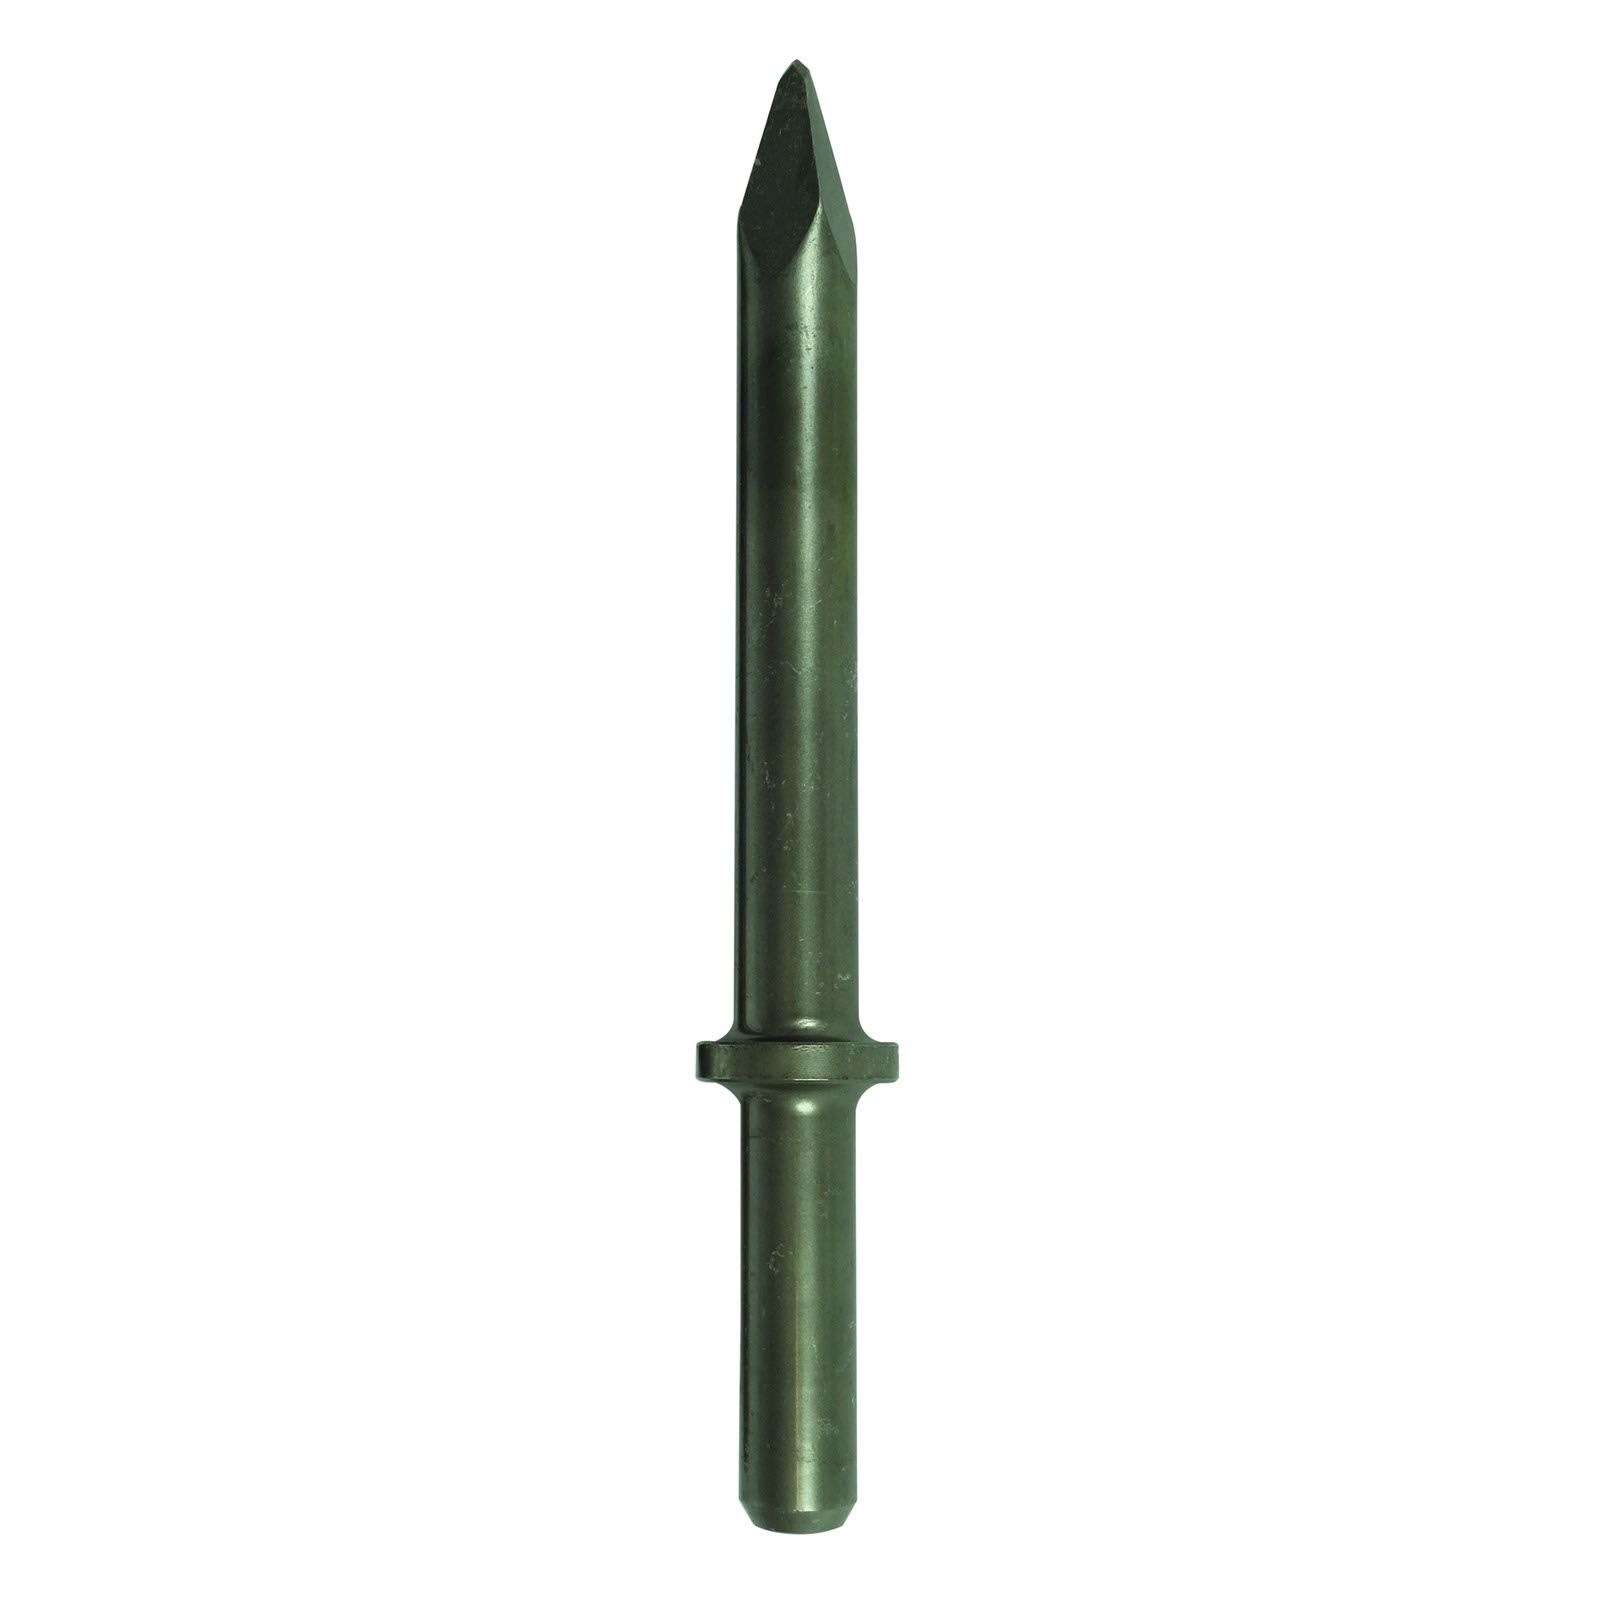 PICK CHISEL SHANK ROUND 15MM product photo